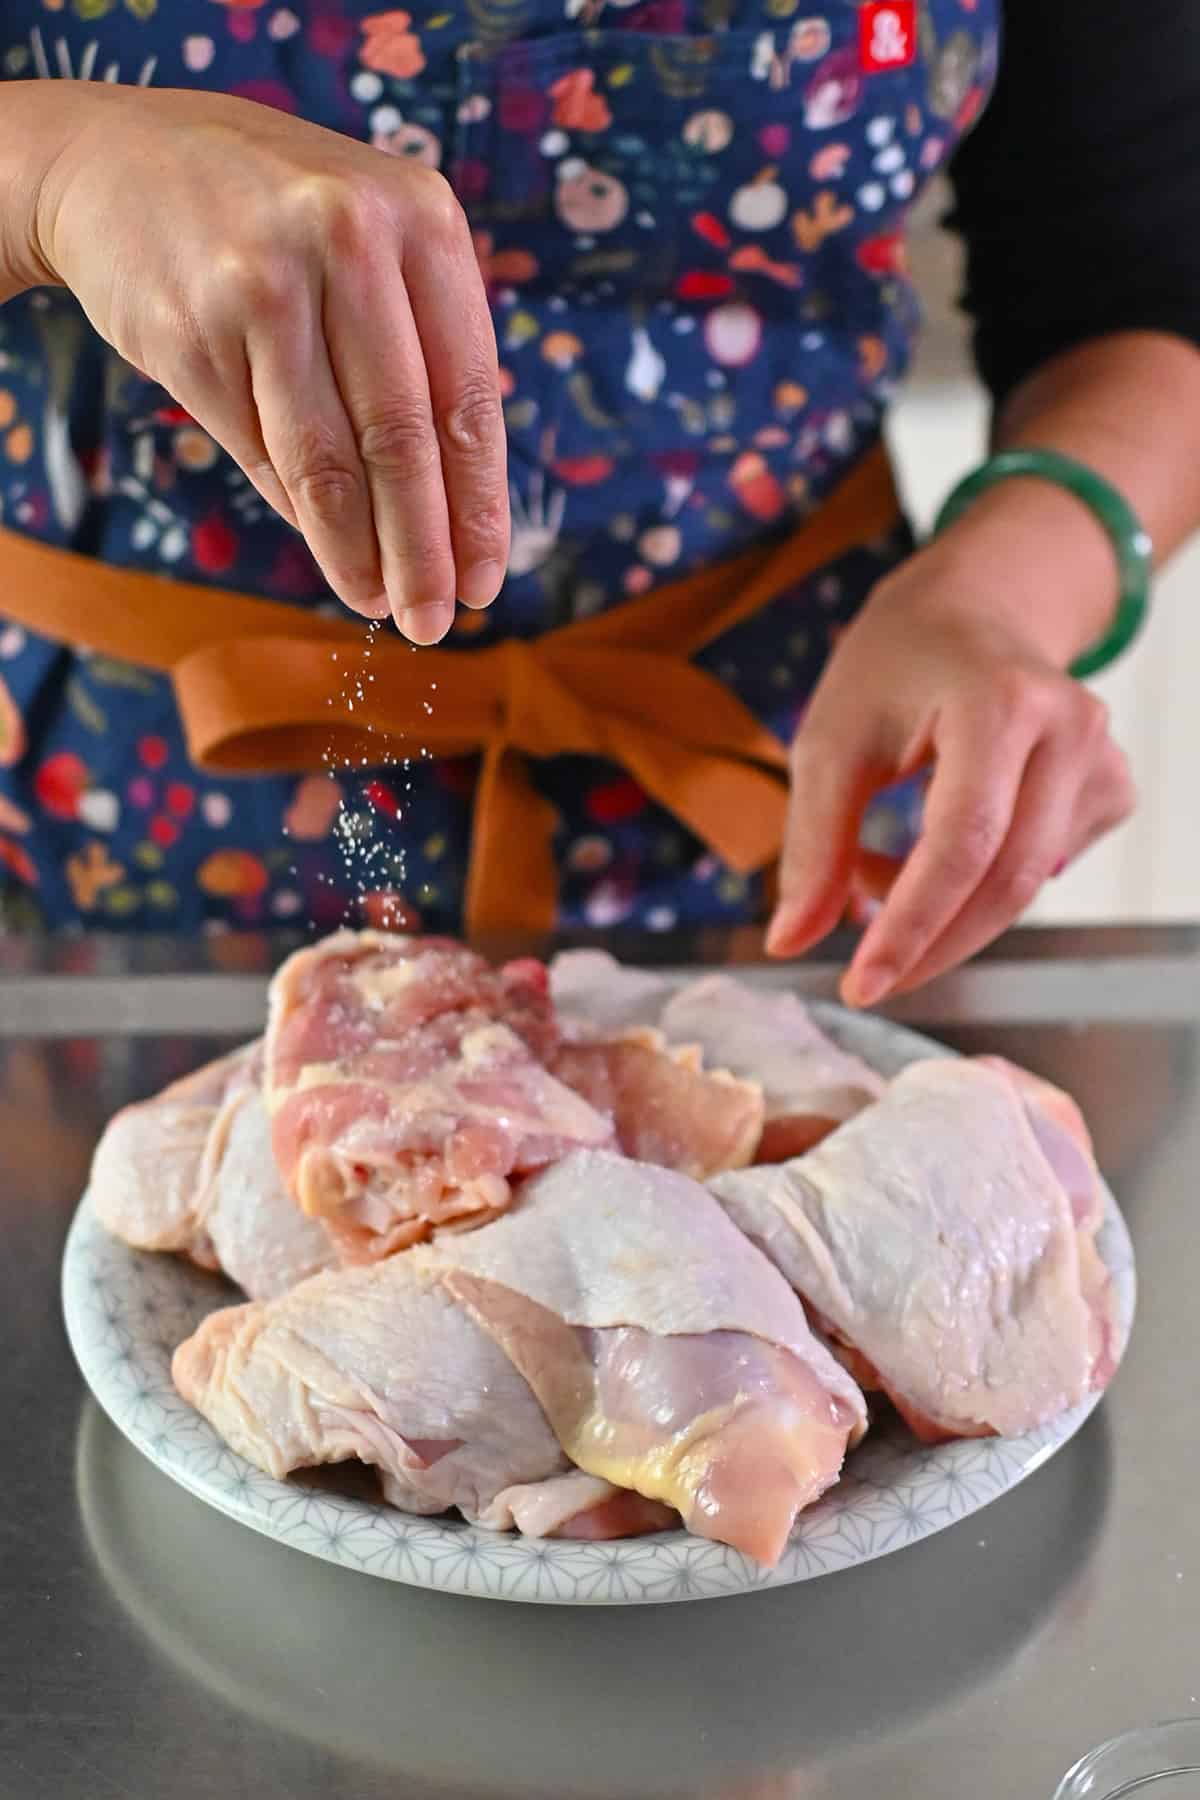 A person in a blue apron is sprinkling kosher salt on a plate filled with raw skin-on bone-in chicken thighs.